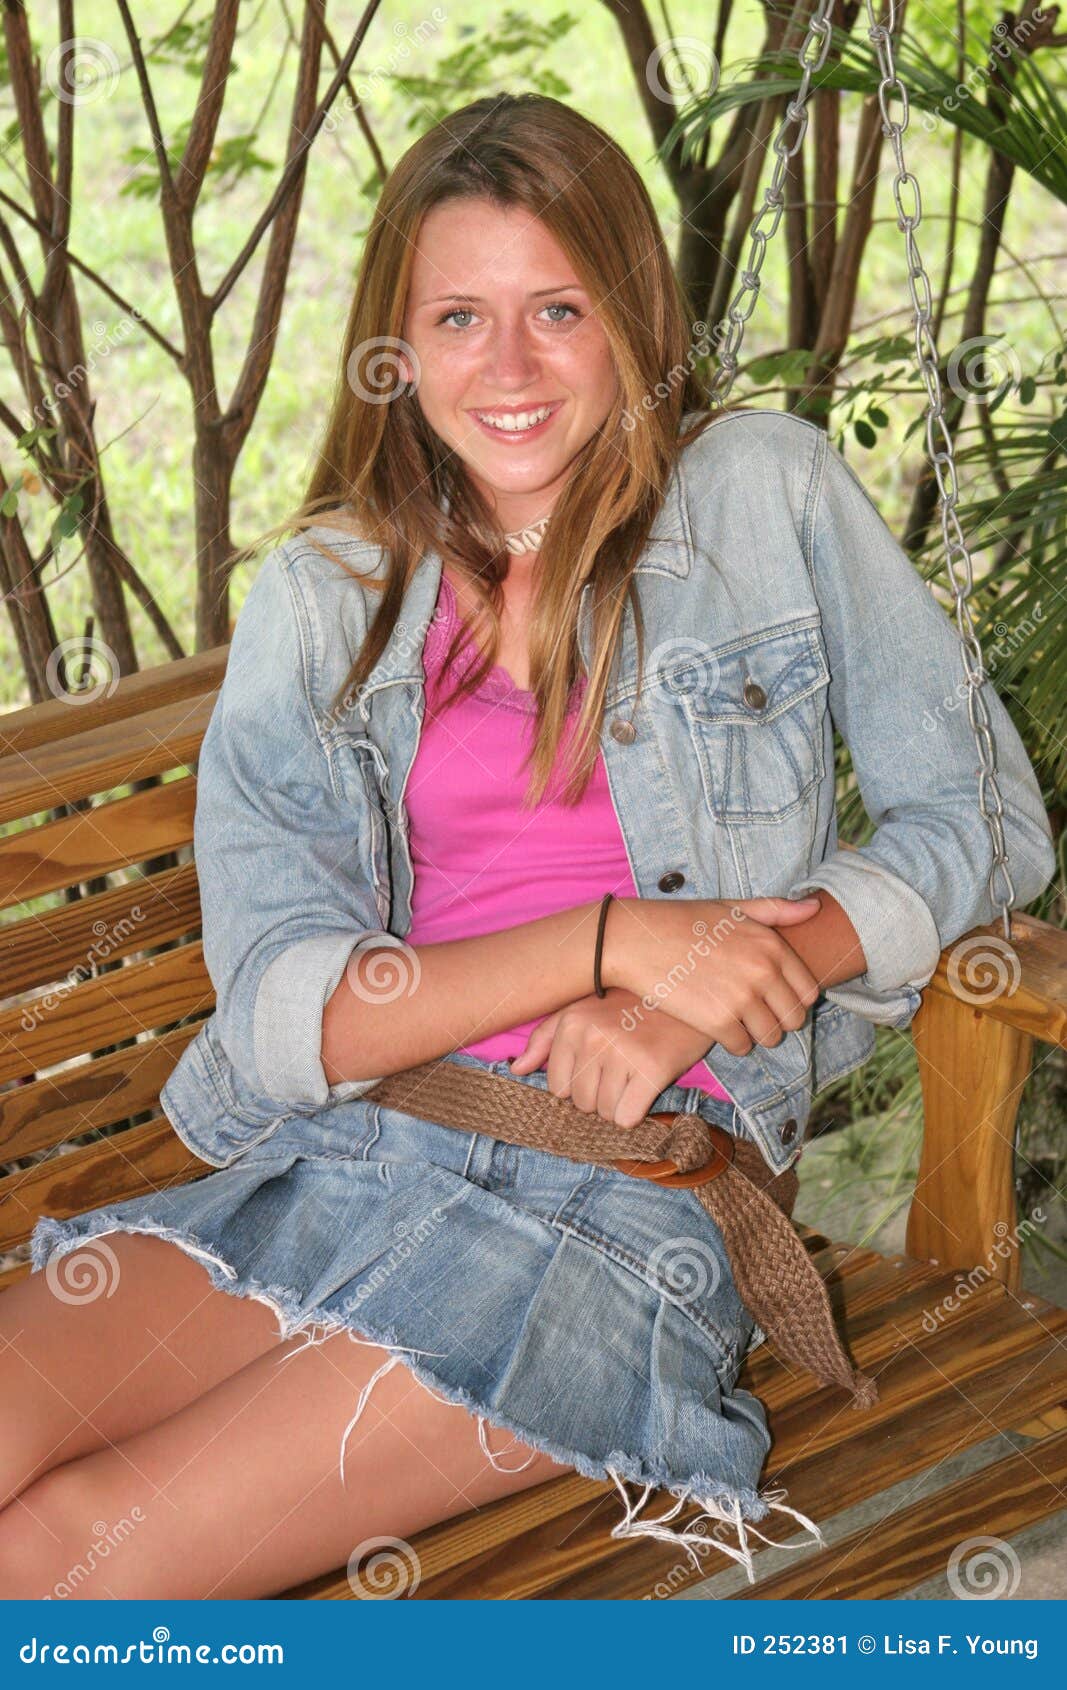 Cute Girl Laughing On Porch Stock Photo - Image of smiling, home: 19694794